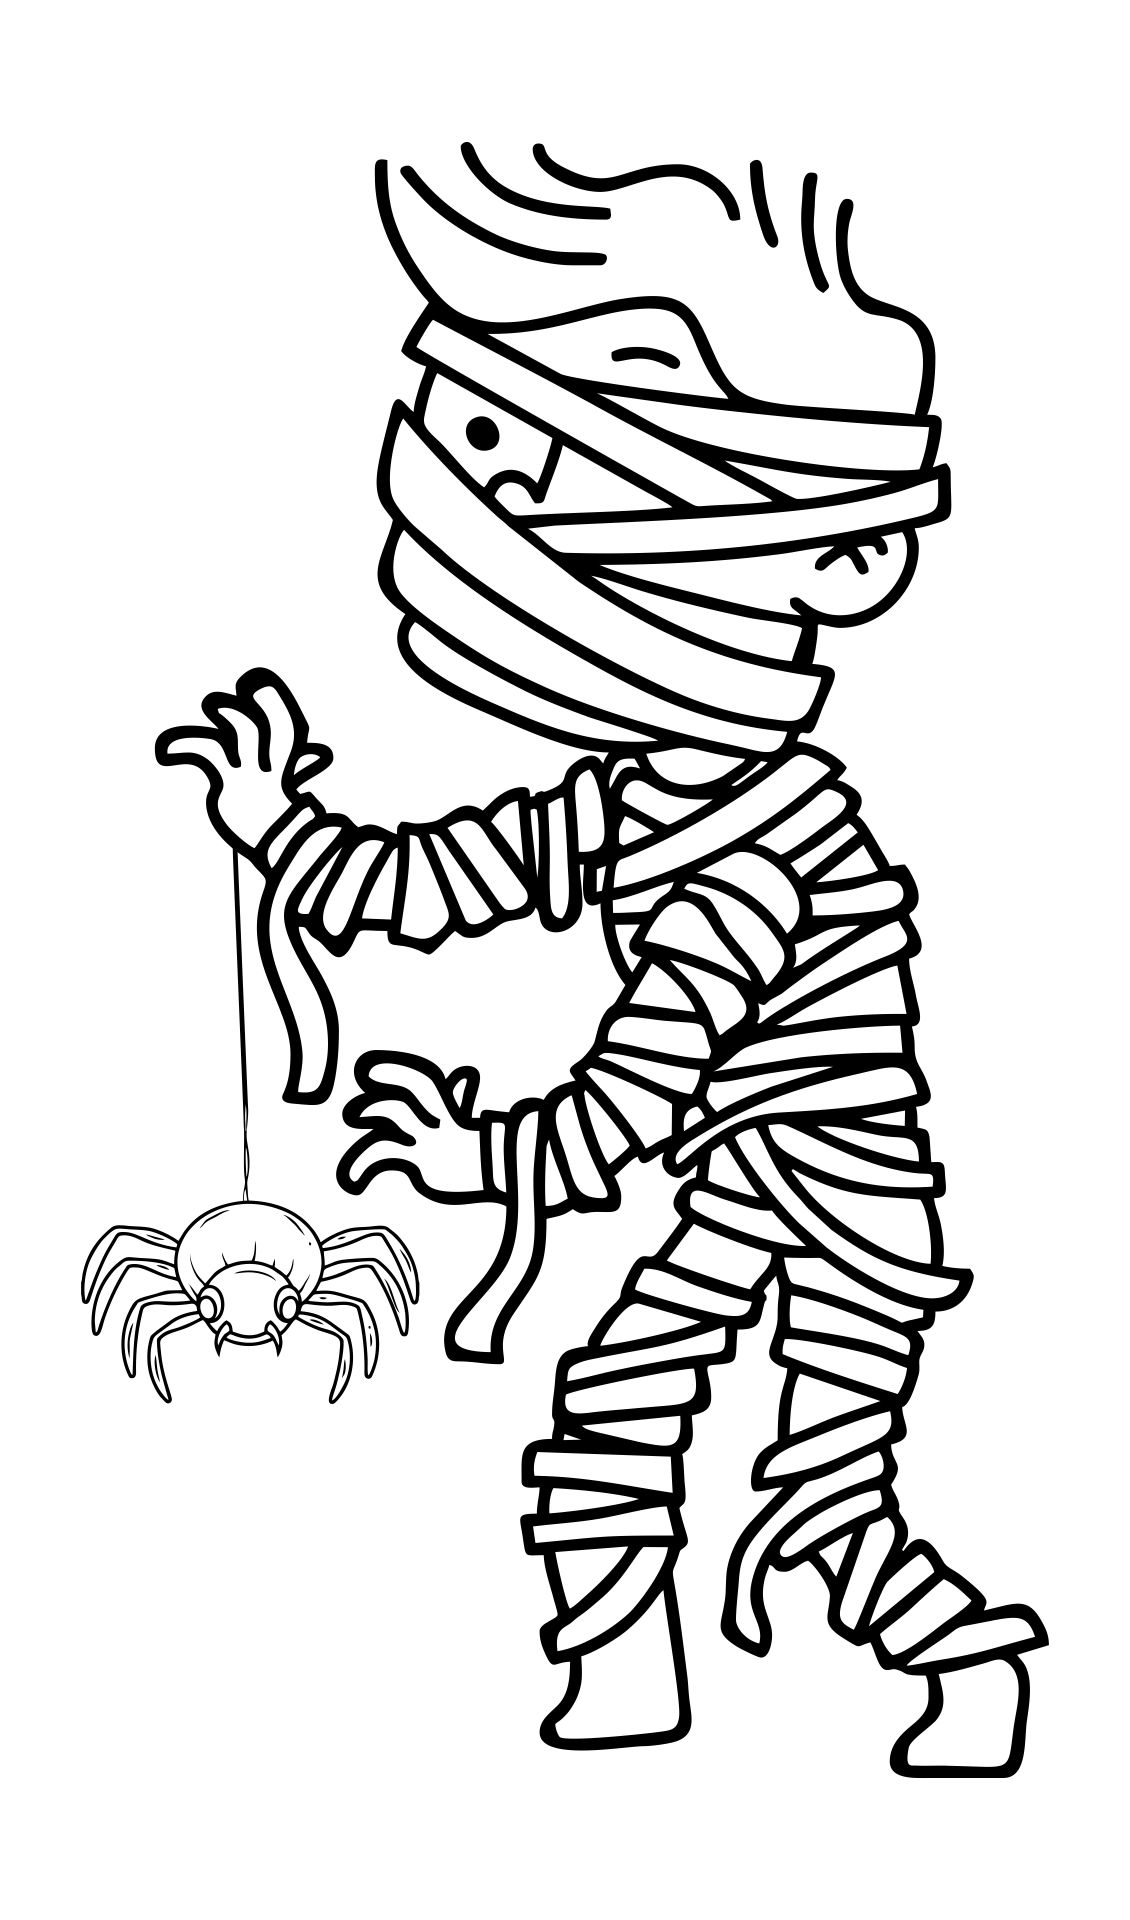 Halloween Mummy And Spider Coloring Page For Kids Printable Free